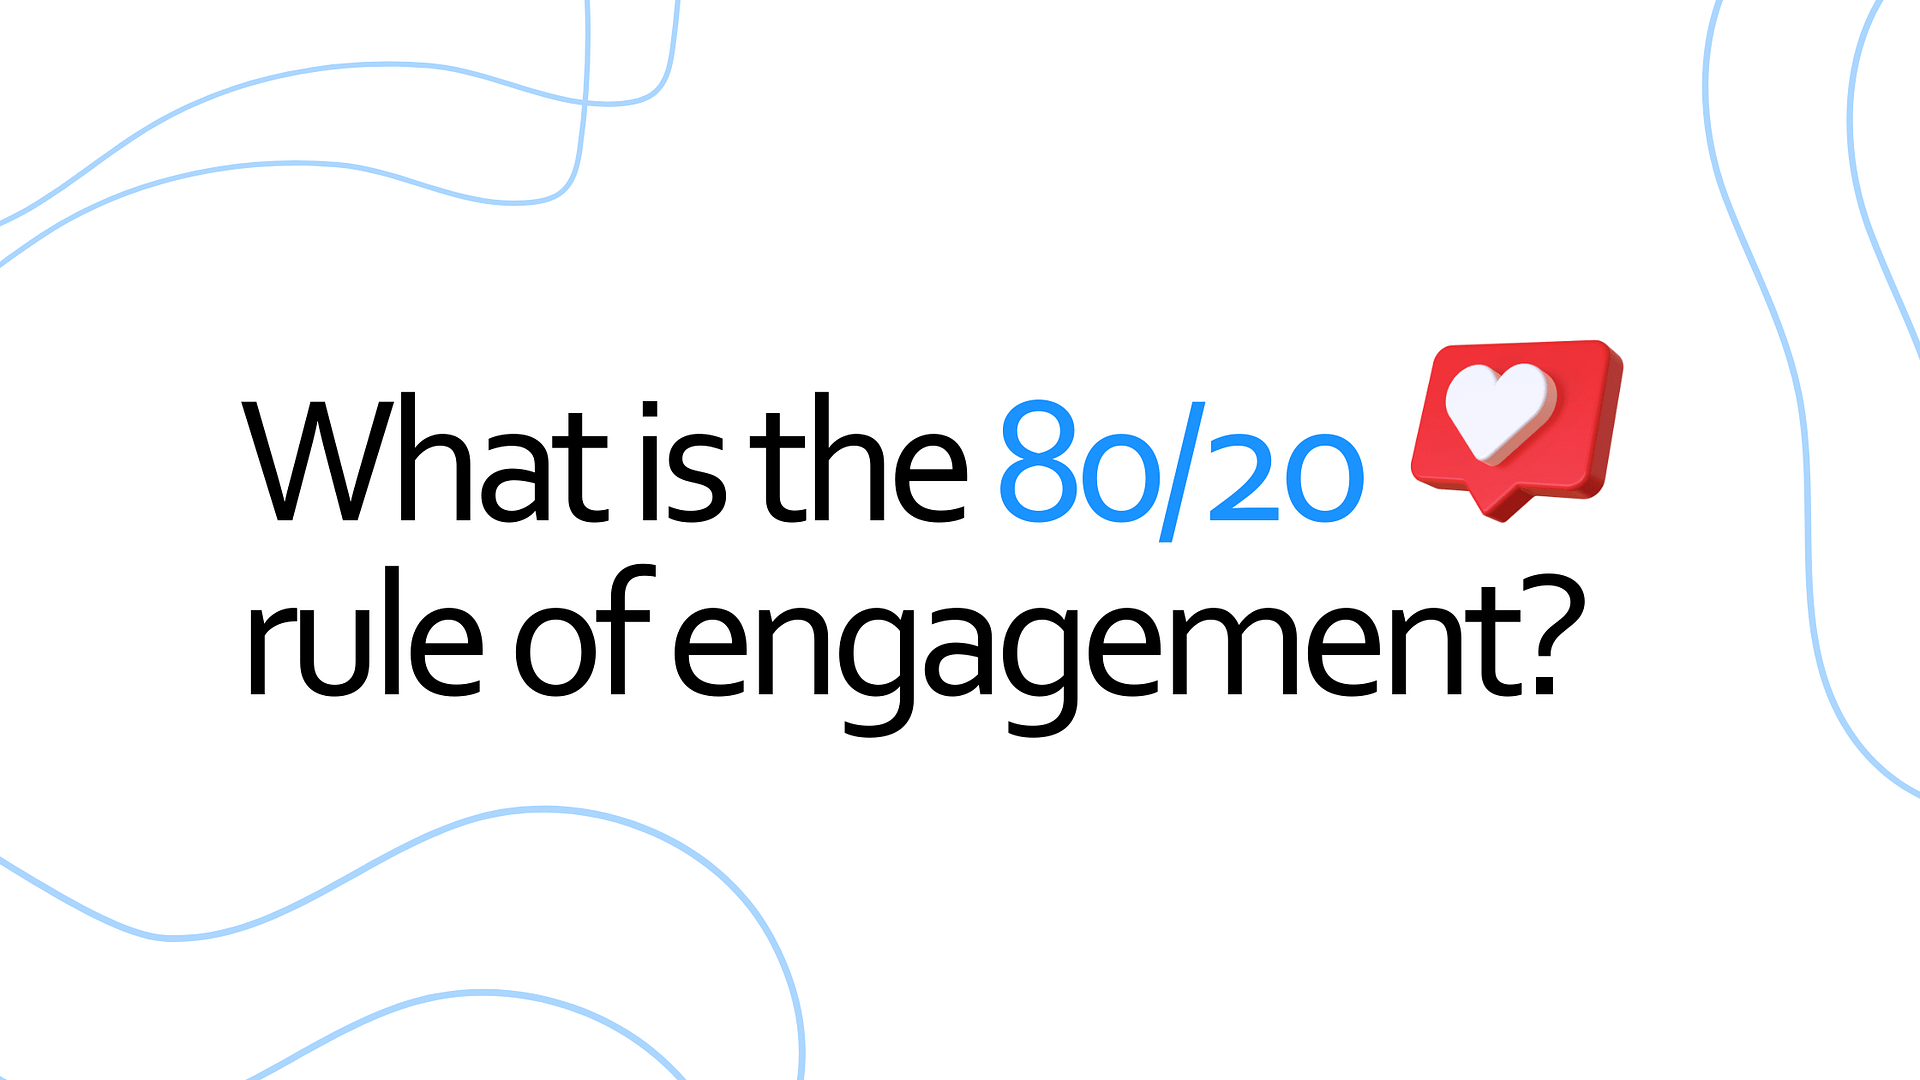 What is the 80/20 rule of engagement?